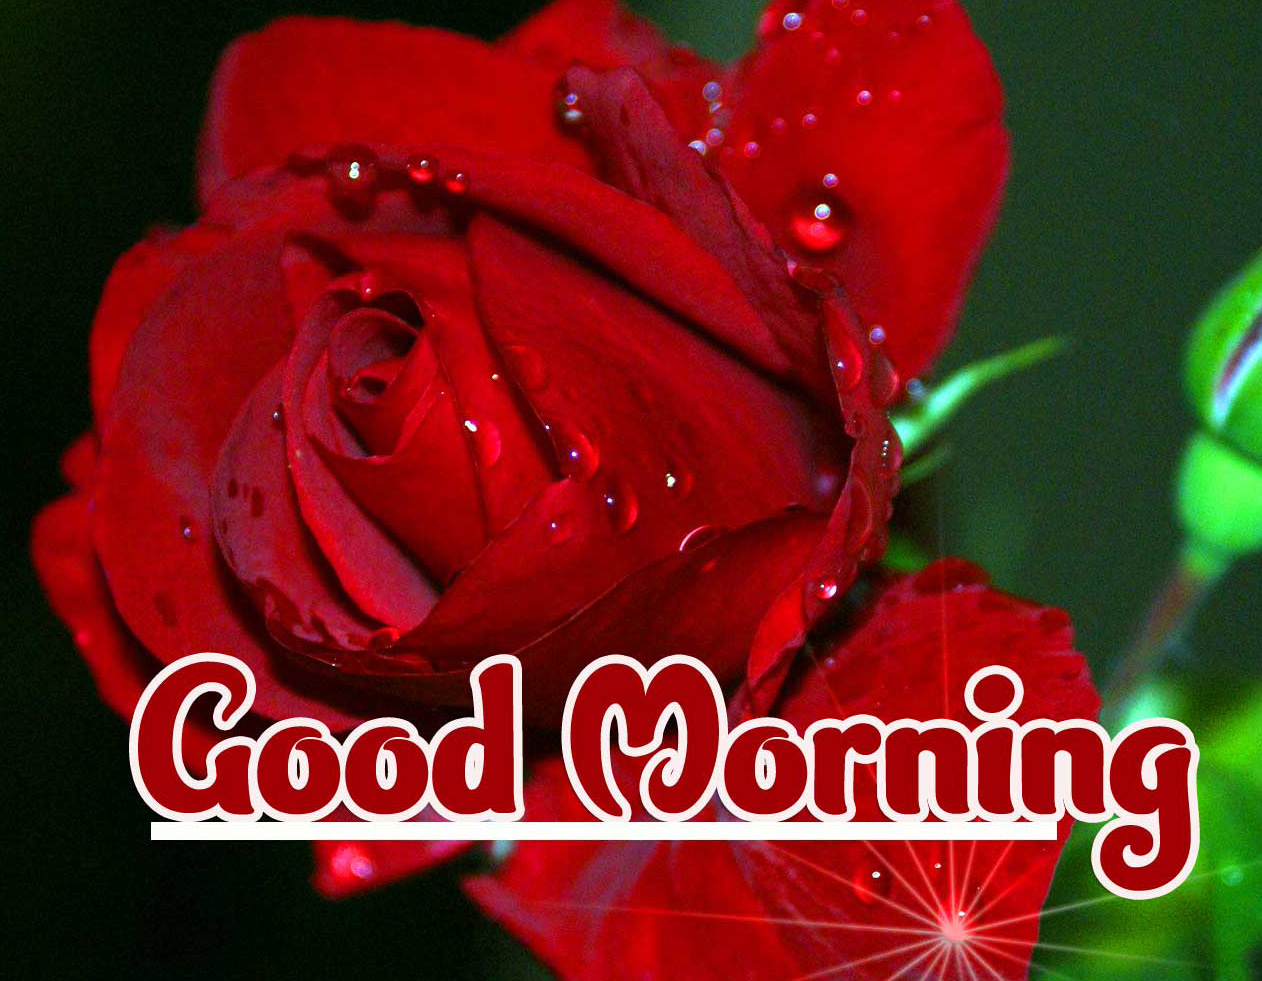 1080p Good Morning Images Pics Download 